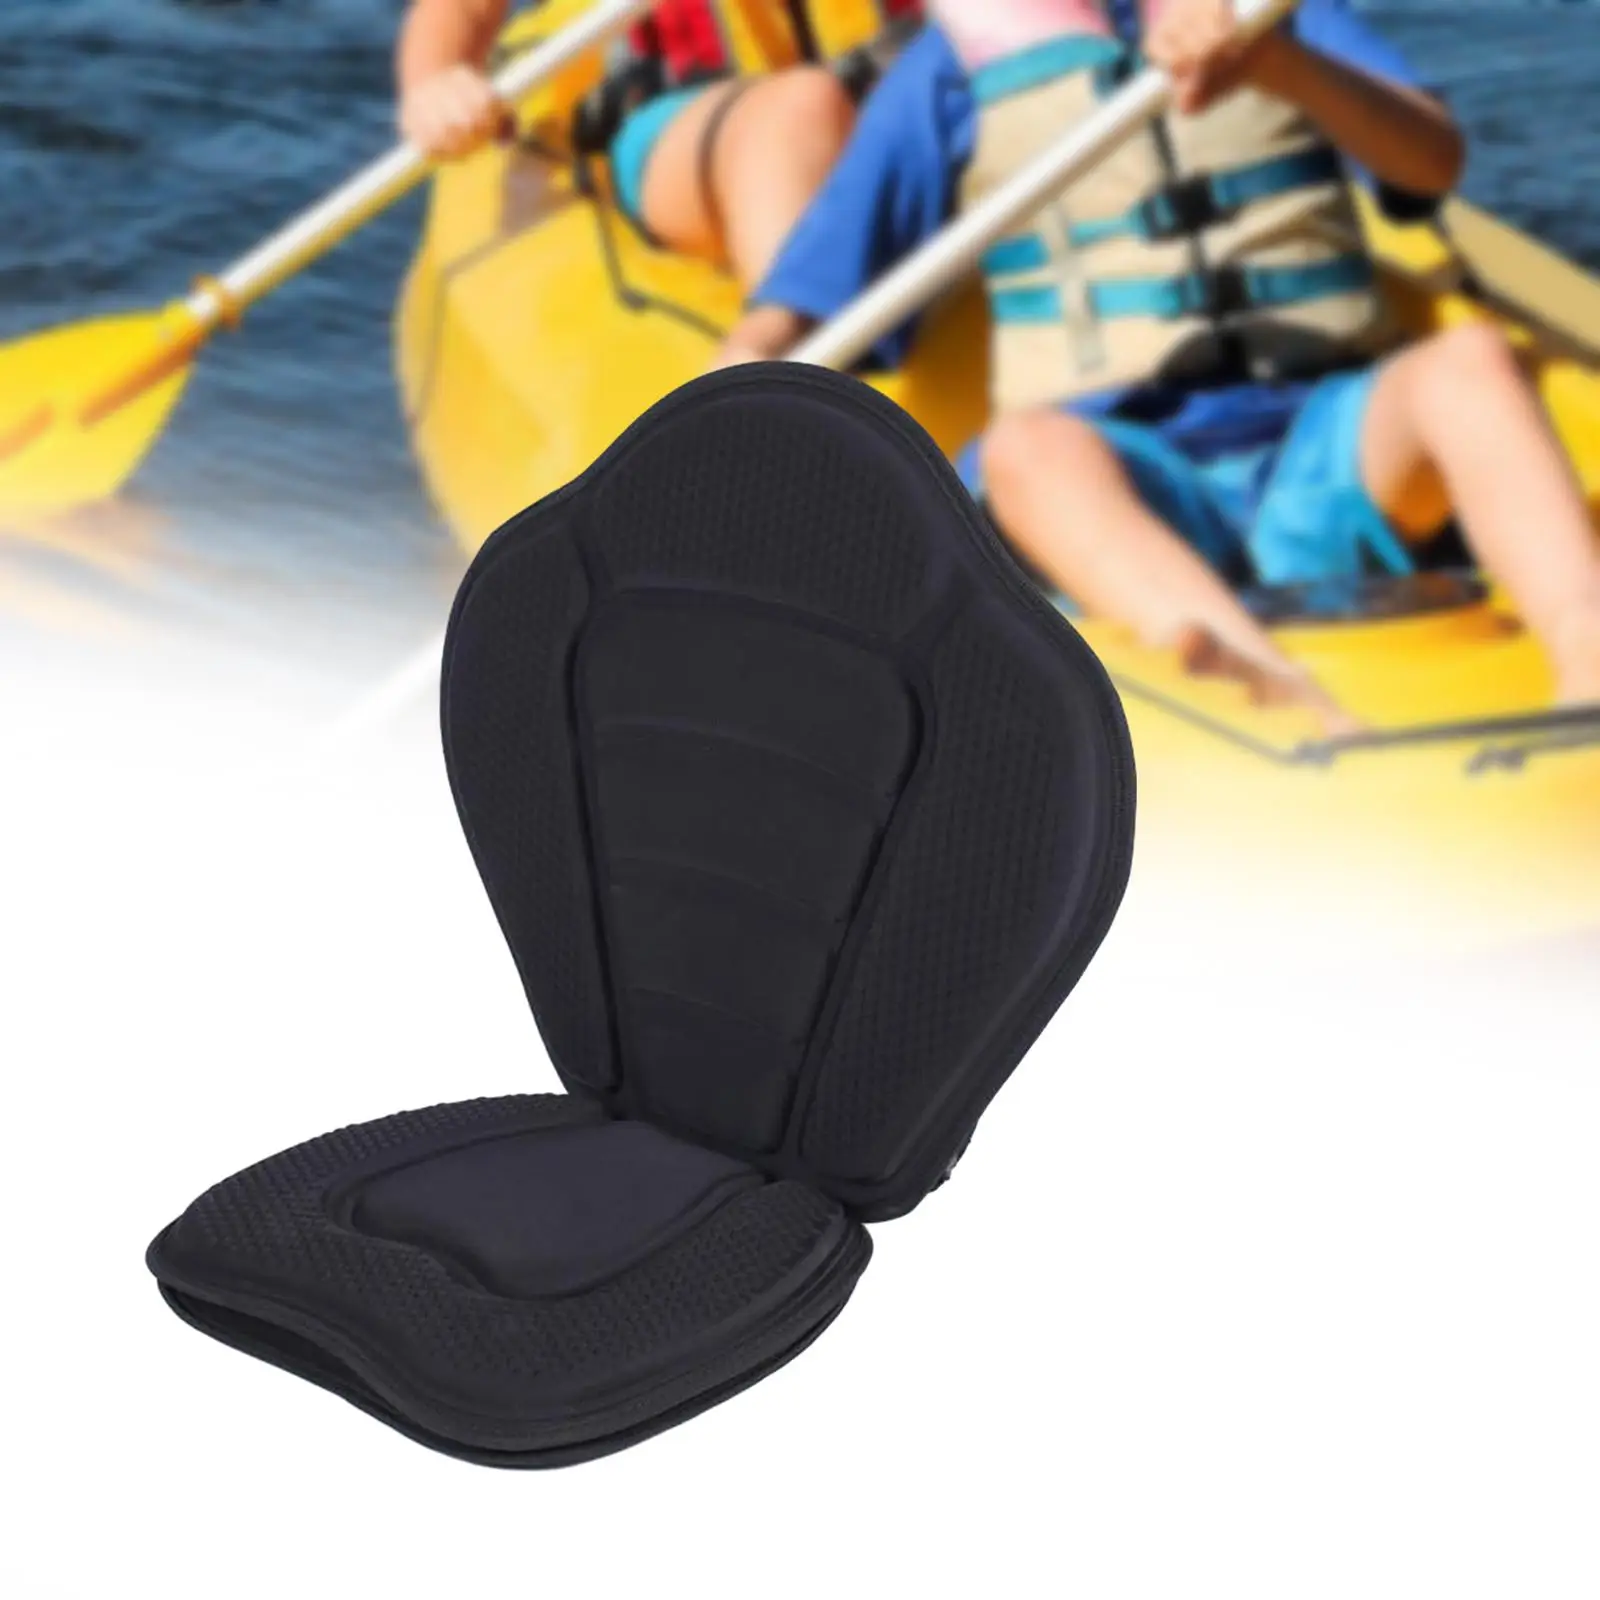 Kayak Seats with Back Support Outdoor Durable Universal Lightweight Stadium Seat for Rafting Fishing Drifting Floating Canoeing